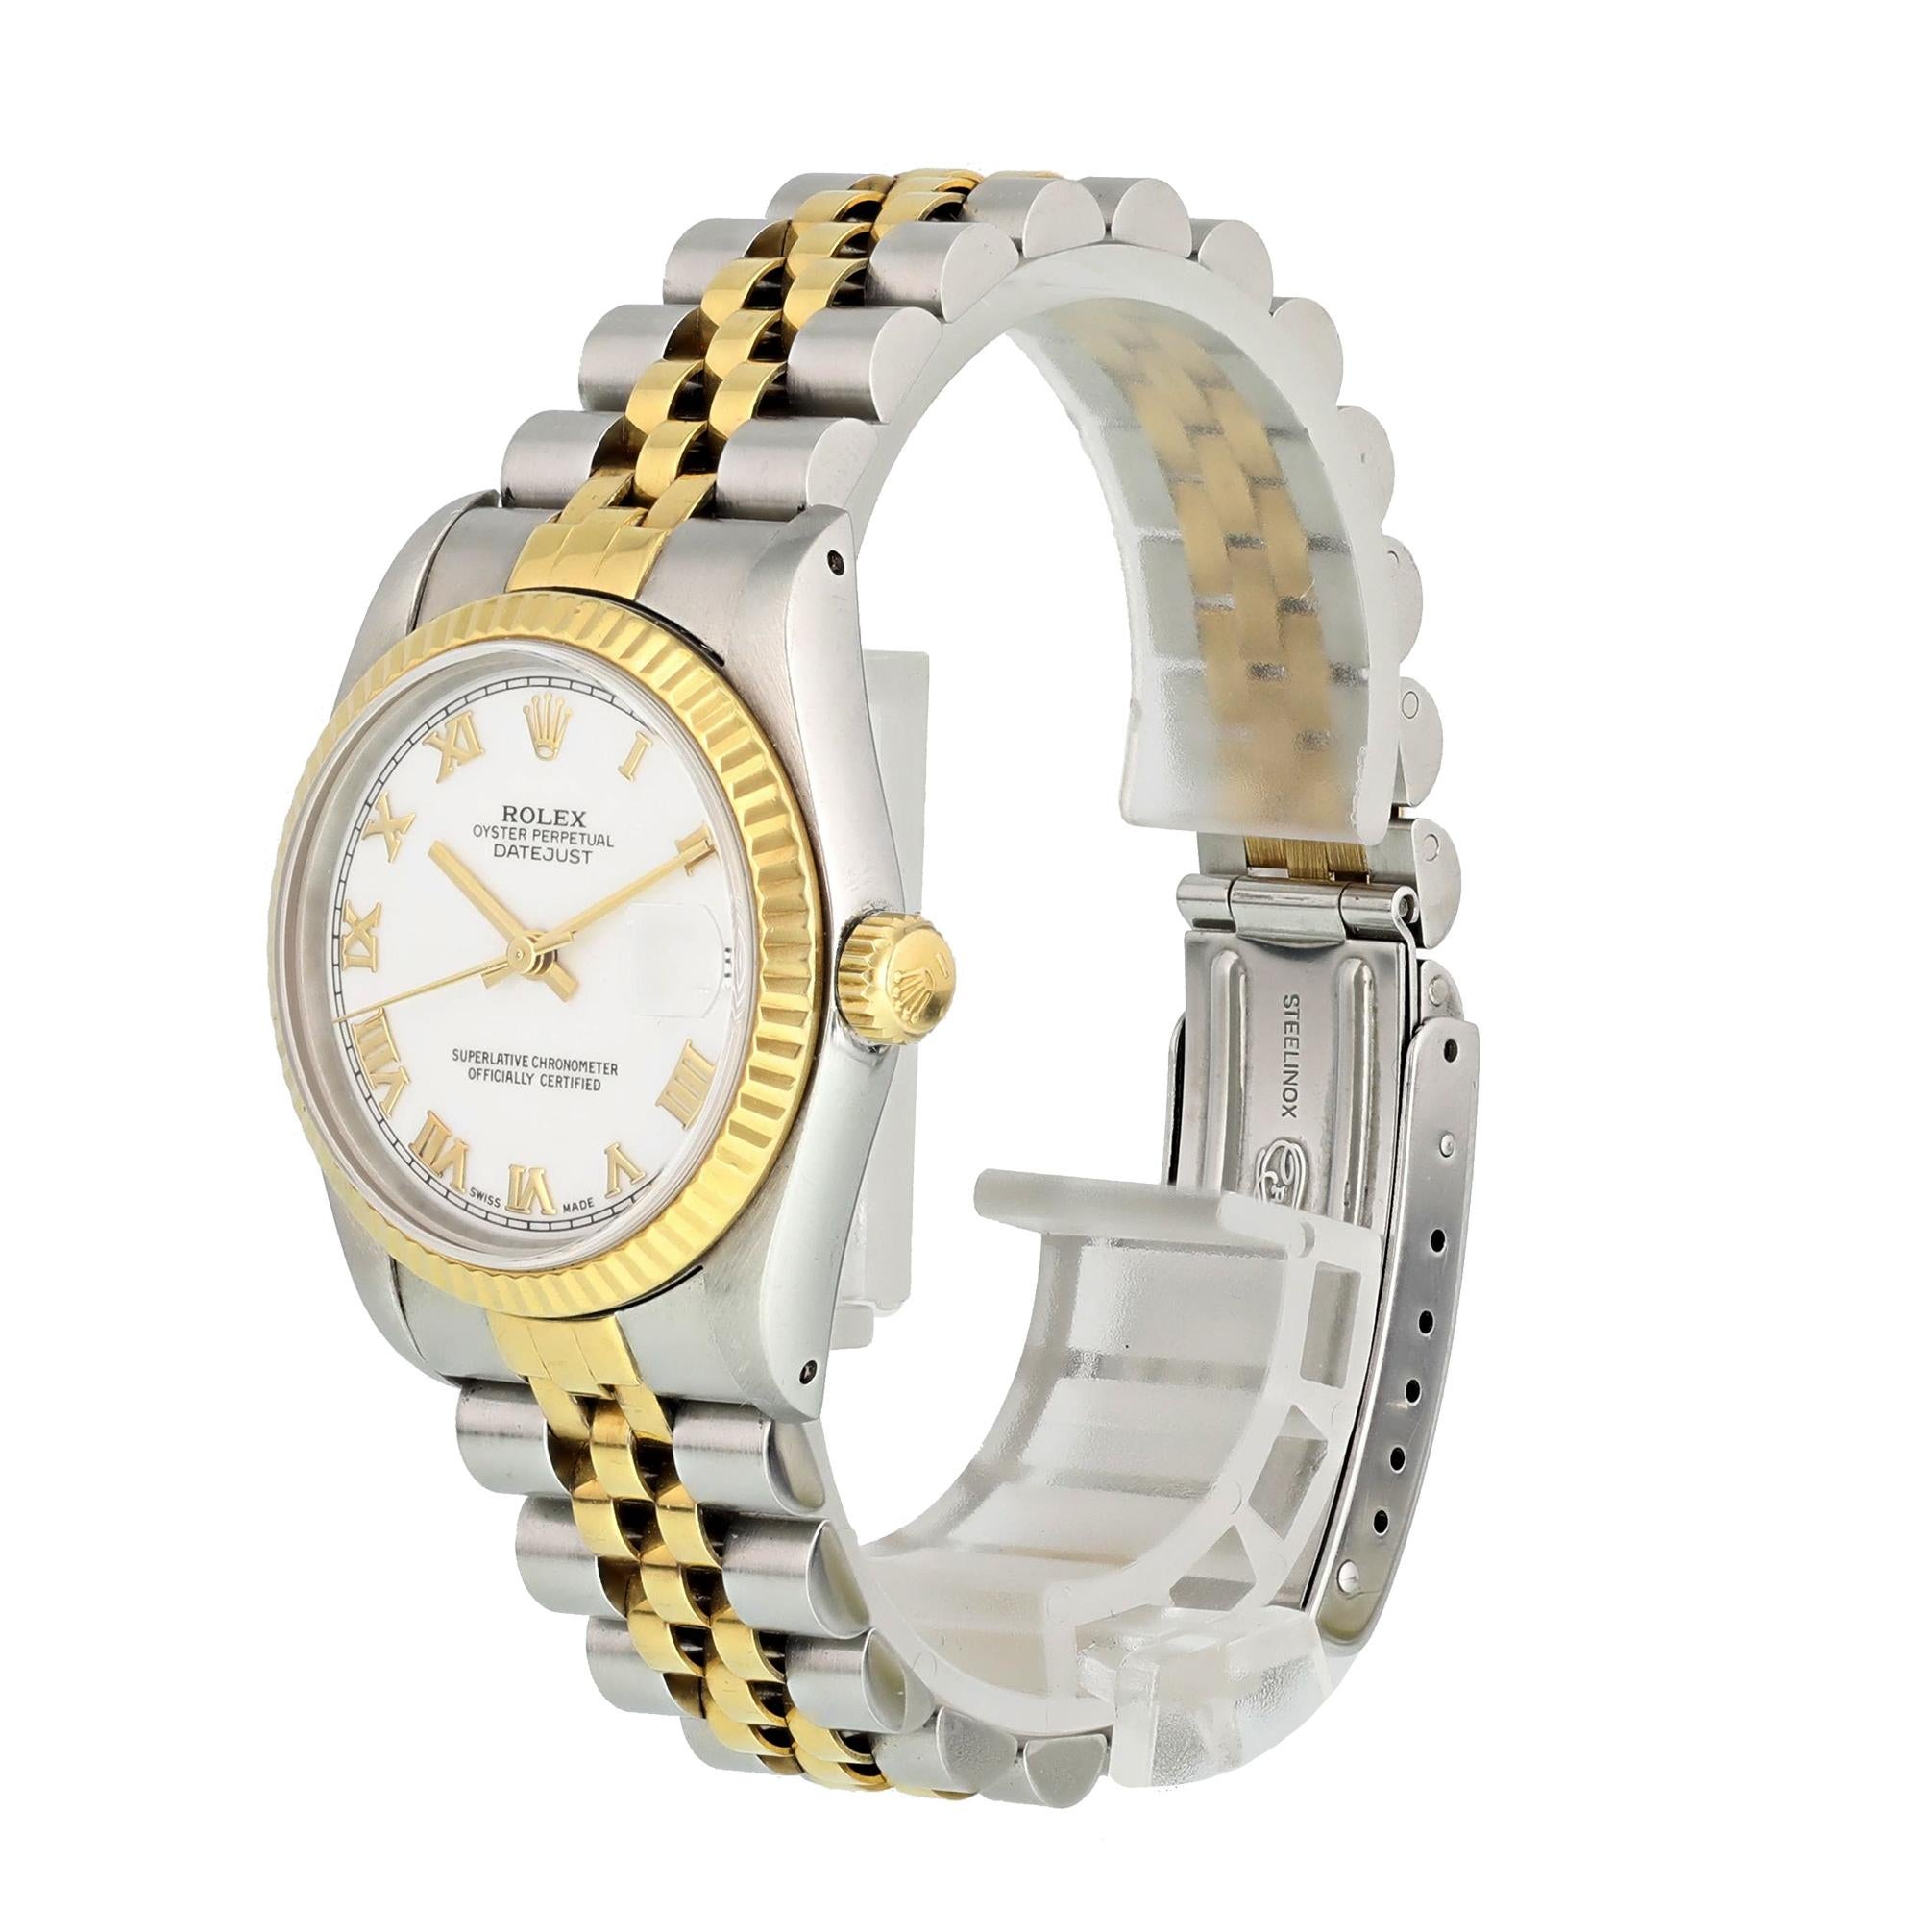 Rolex Datejust 69173 Ladies Watch
26mm Stainless Steel case. 
Yellow Gold Stationary bezel. 
White dial with gold hands and Roman numeral hour markers. 
Minute markers on the outer dial. 
Date display at the 3 o'clock position. 
Stainless Steel